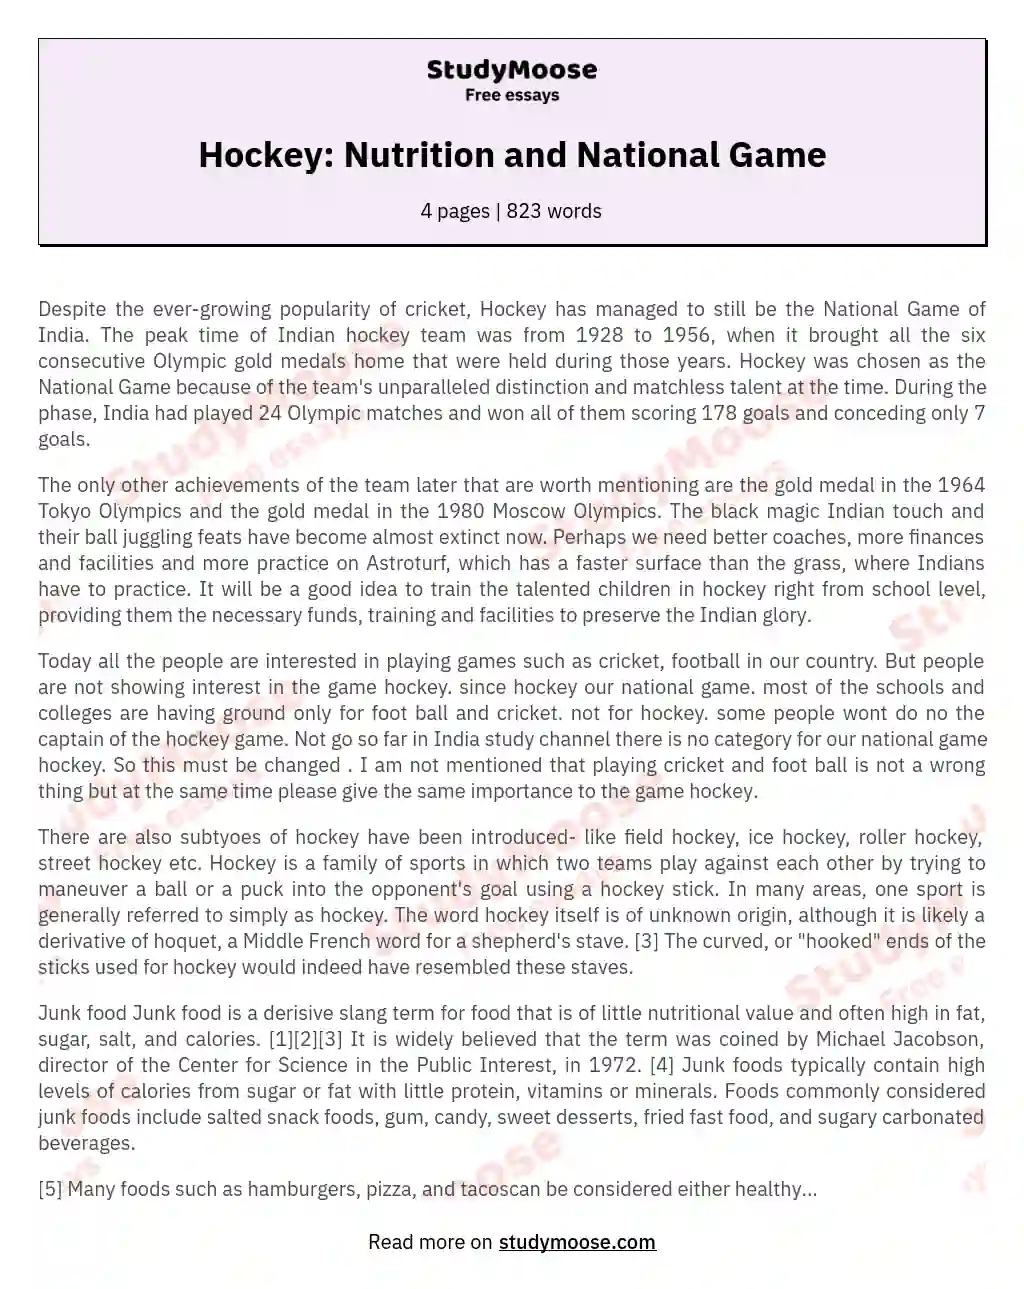 Hockey: Nutrition and National Game essay